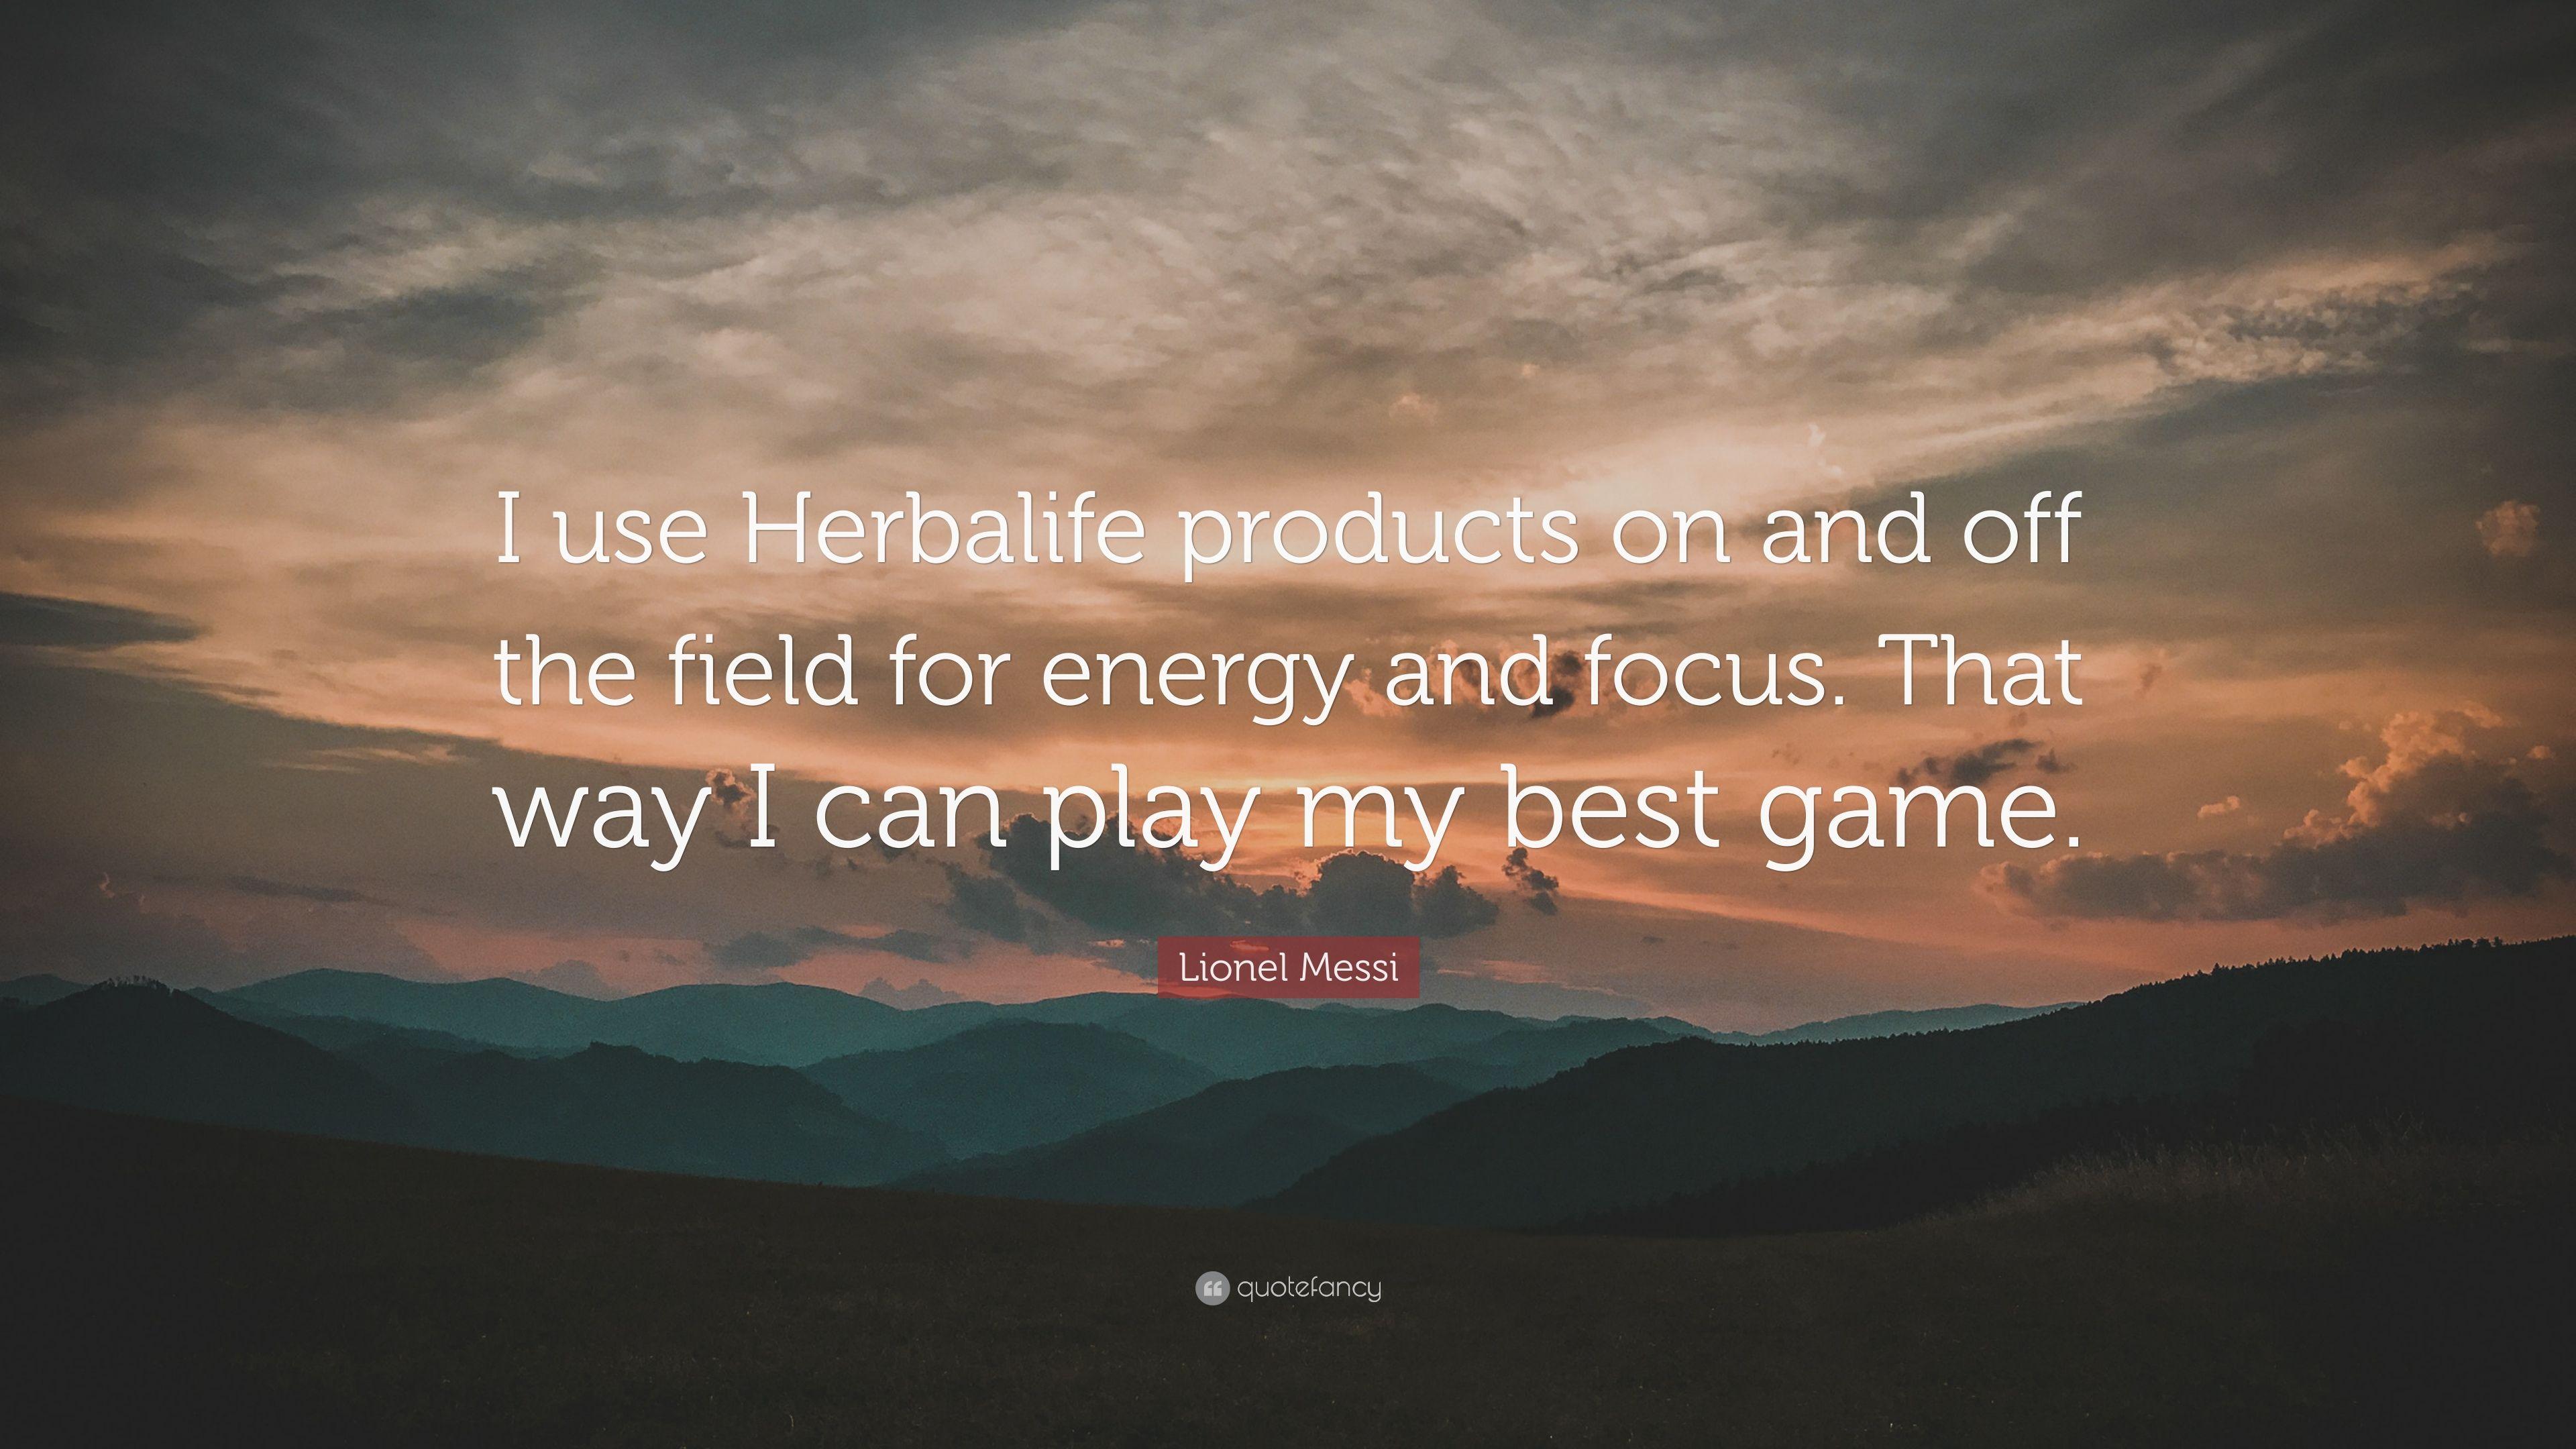 Lionel Messi Quote: “I use Herbalife products on